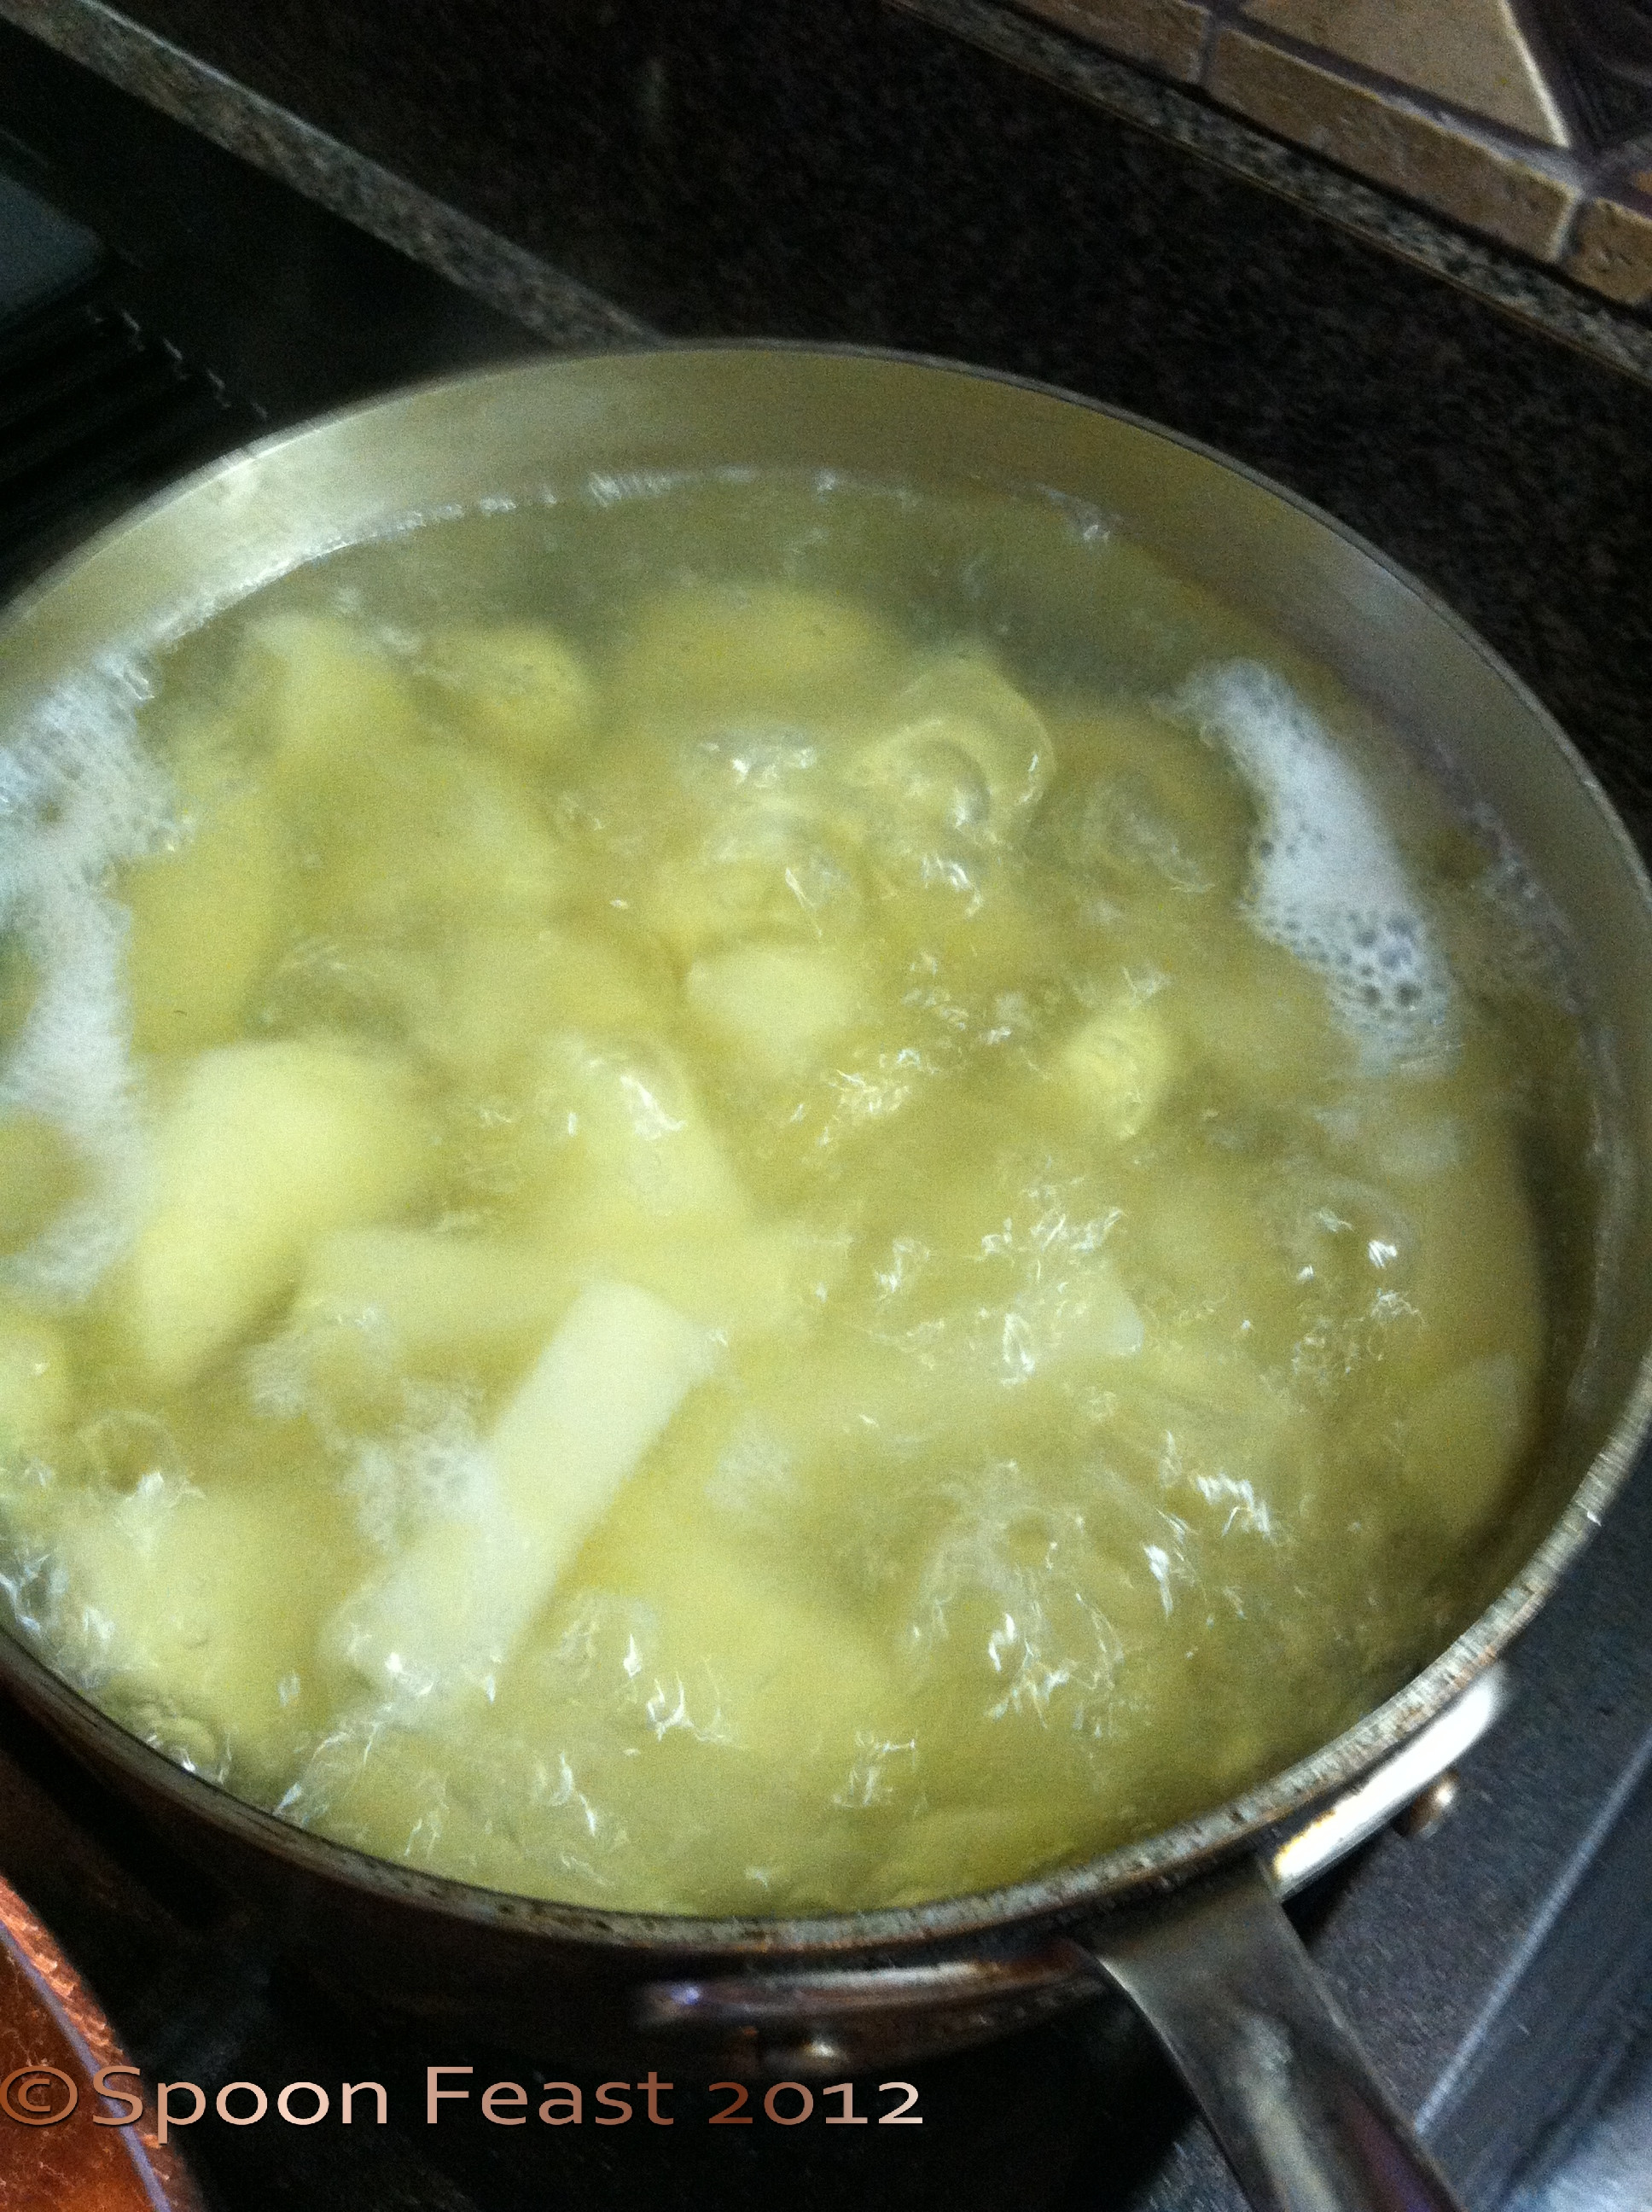 How Long Do You Boil Potatoes To Make Mashed Potatoes
 How to Boil Potatoes for Making Mashed Potatoes